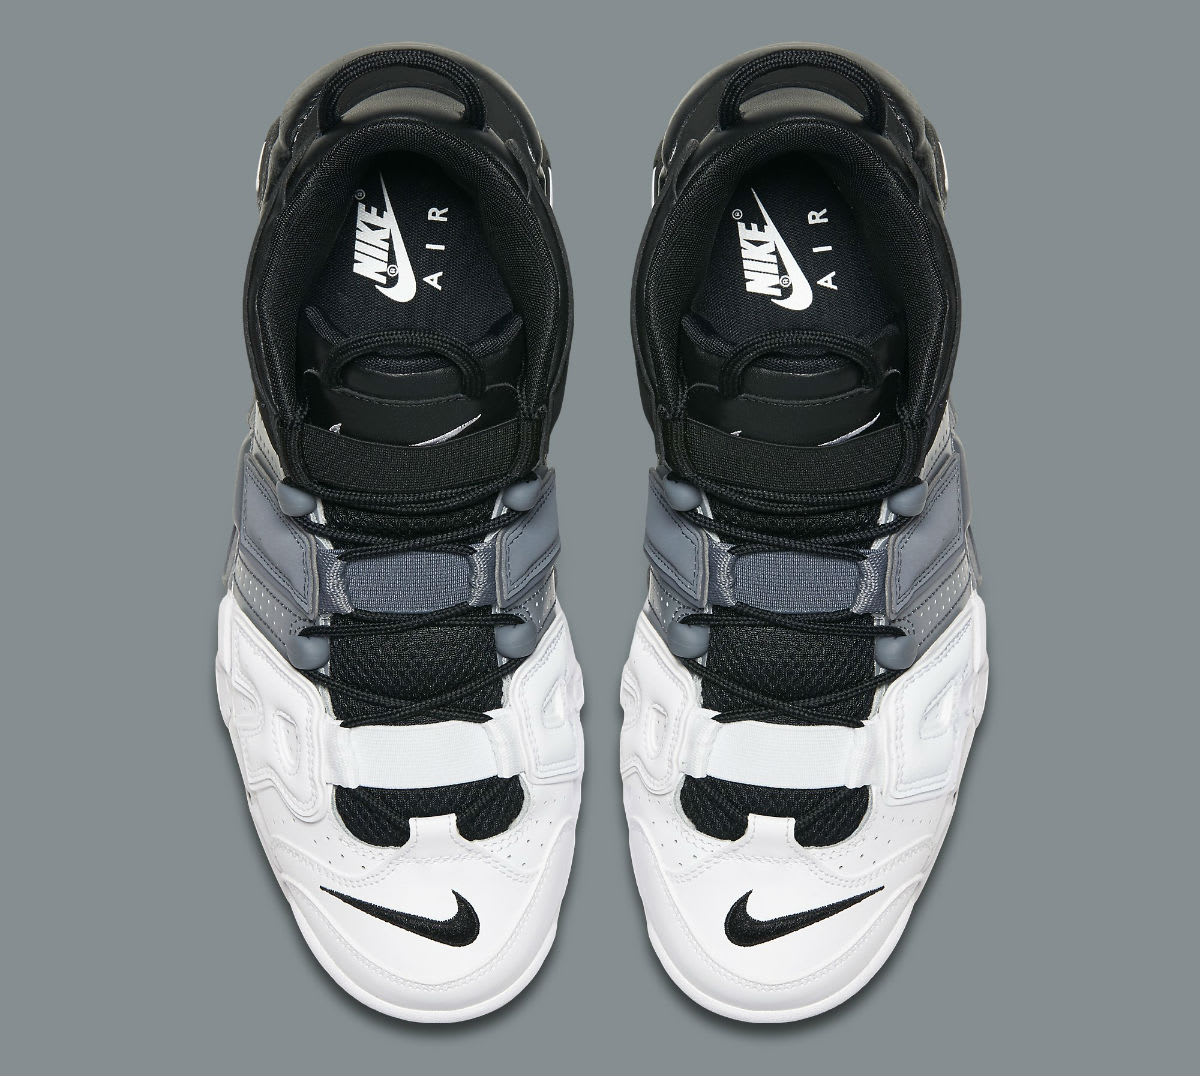 Nike Air More Uptempo Tri-Color Release Date Top 921948-002